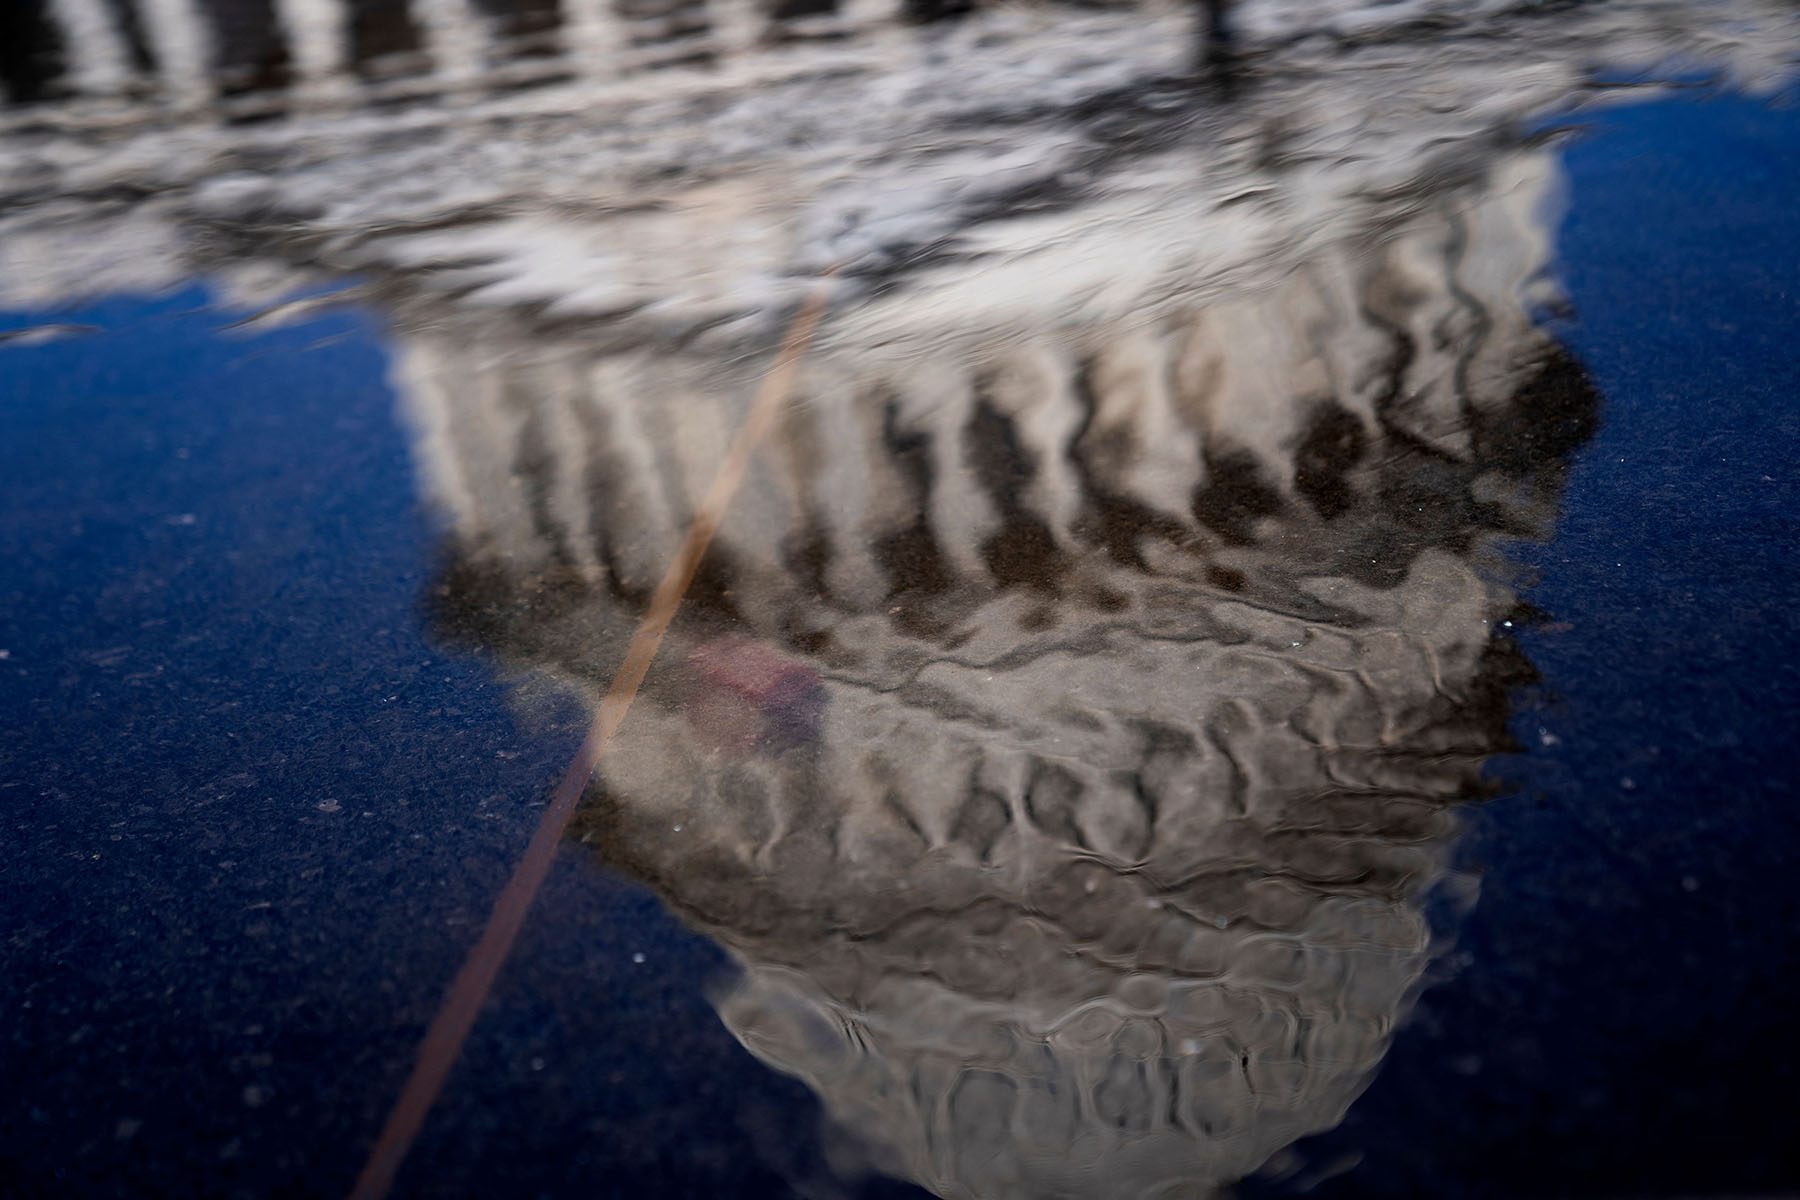 The Capitol Dome is reflected in a pool of water.